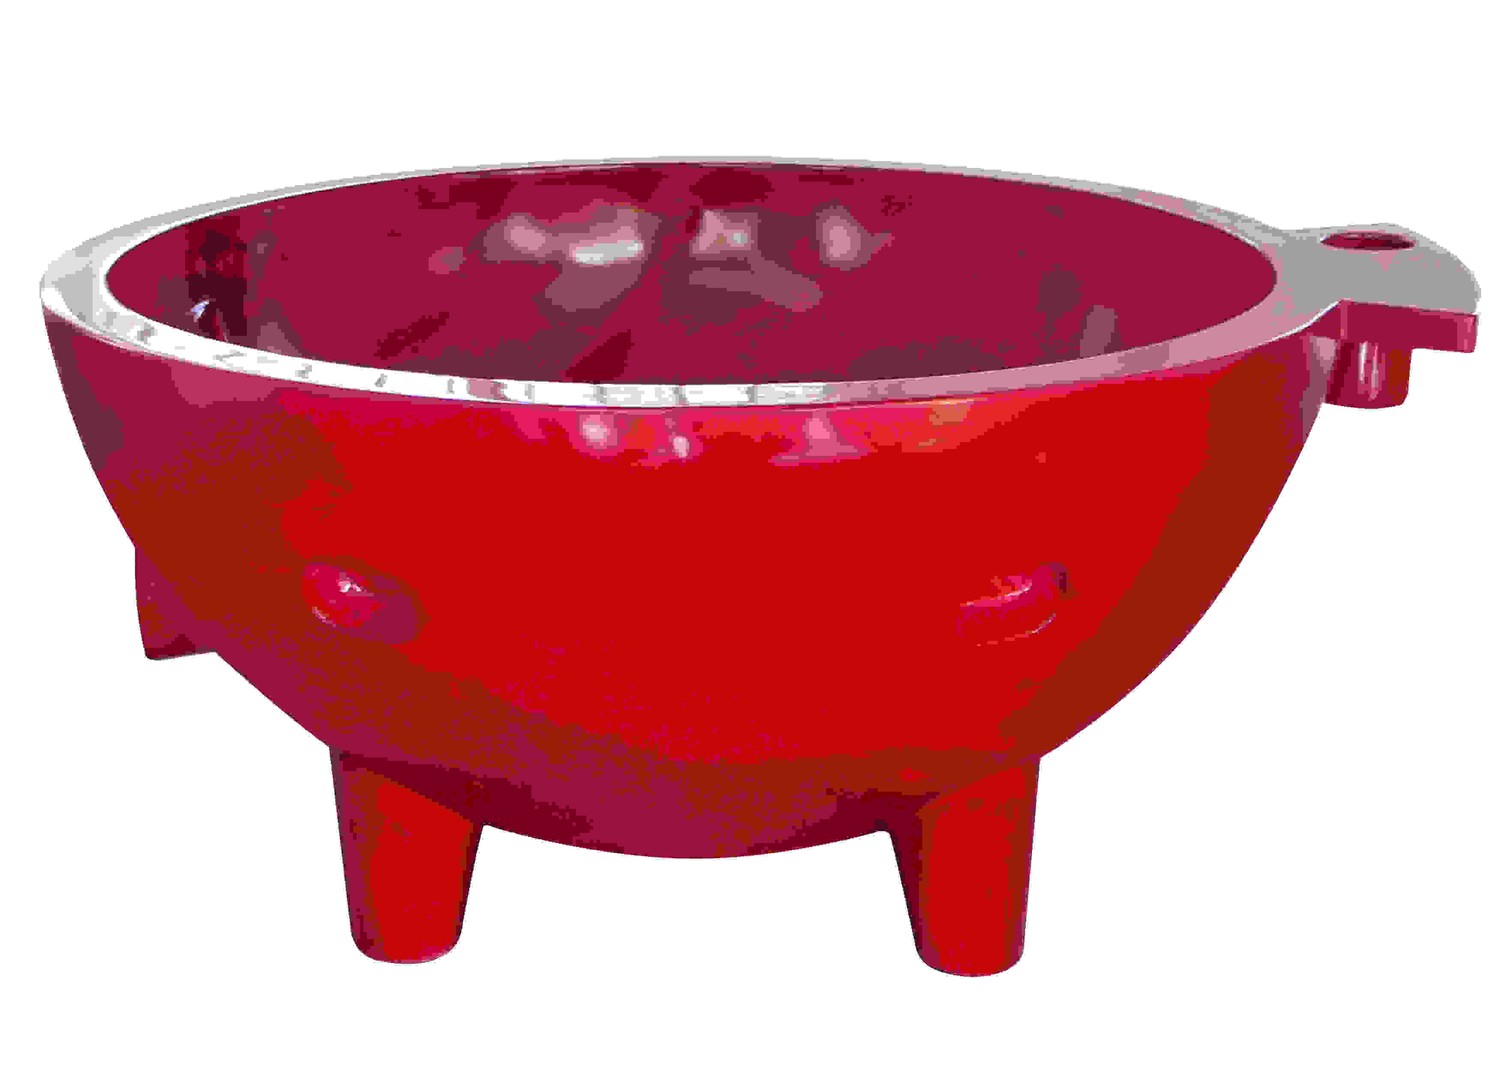 ALFI brand Red Wine FireHotTub The Round Fire Burning Portable Outdoor Hot Bath Tub